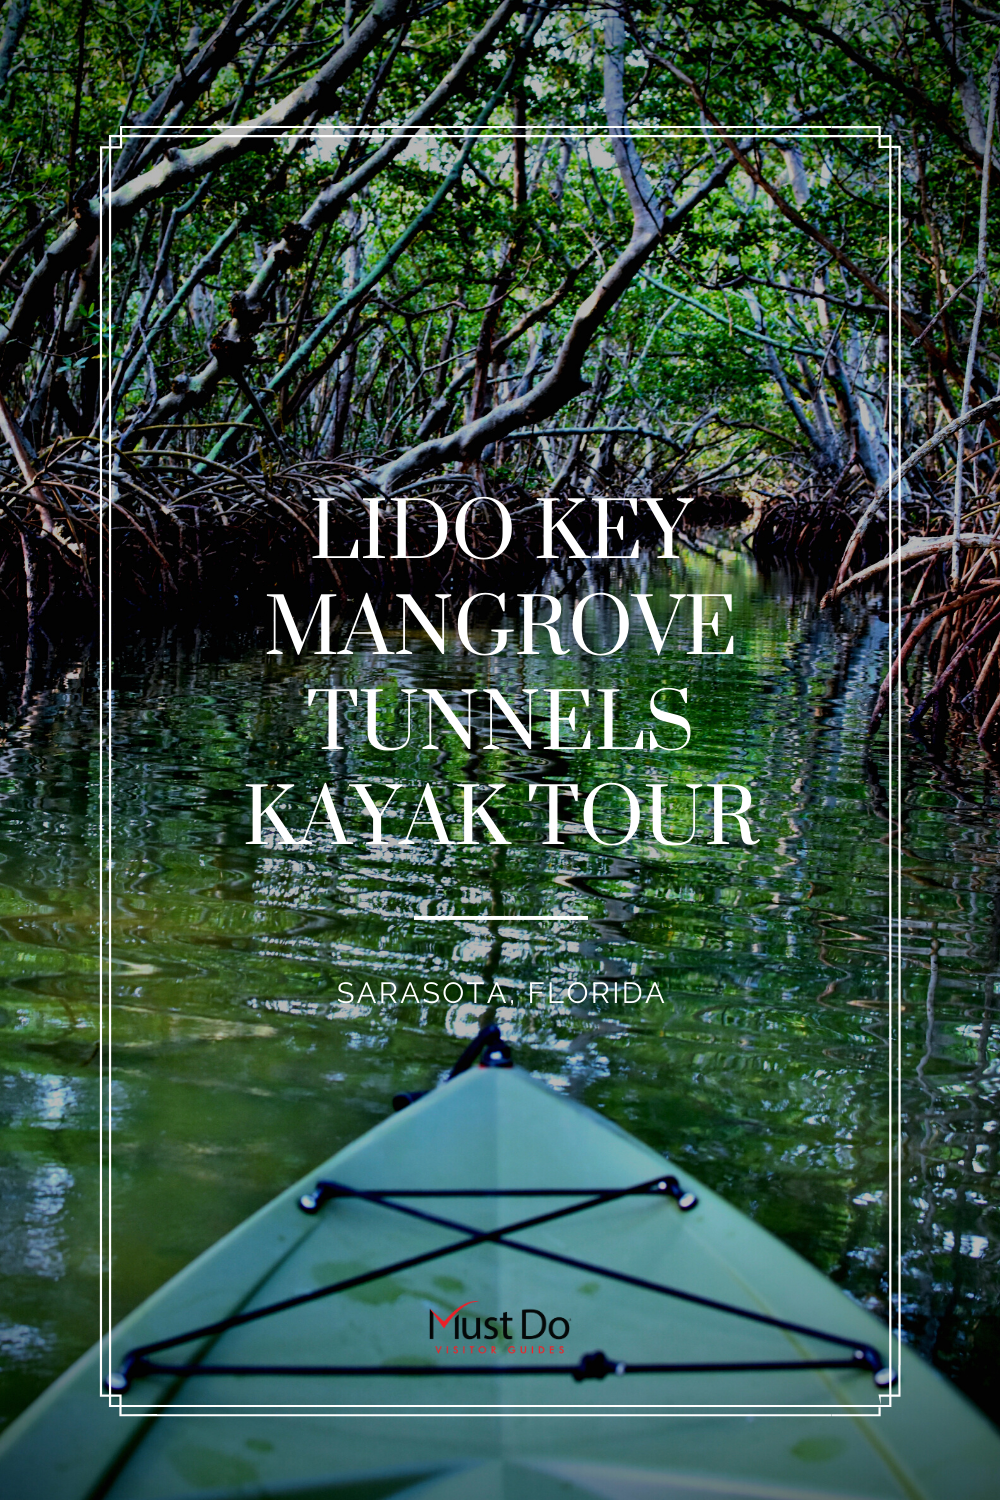 Lido Key Mangrove Tunnels Kayak Tour Sarasota, Florida. Take a Kayaking SRQ guided eco tour of the mangrove tunnels at Ted Sperling Park at South Lido Key in Sarasota, Florida. A favorite tour for all ages—great for the beginner or experienced paddler. Photo credit Andrew Fabian. Must Do Visitor Guides | MustDo.com